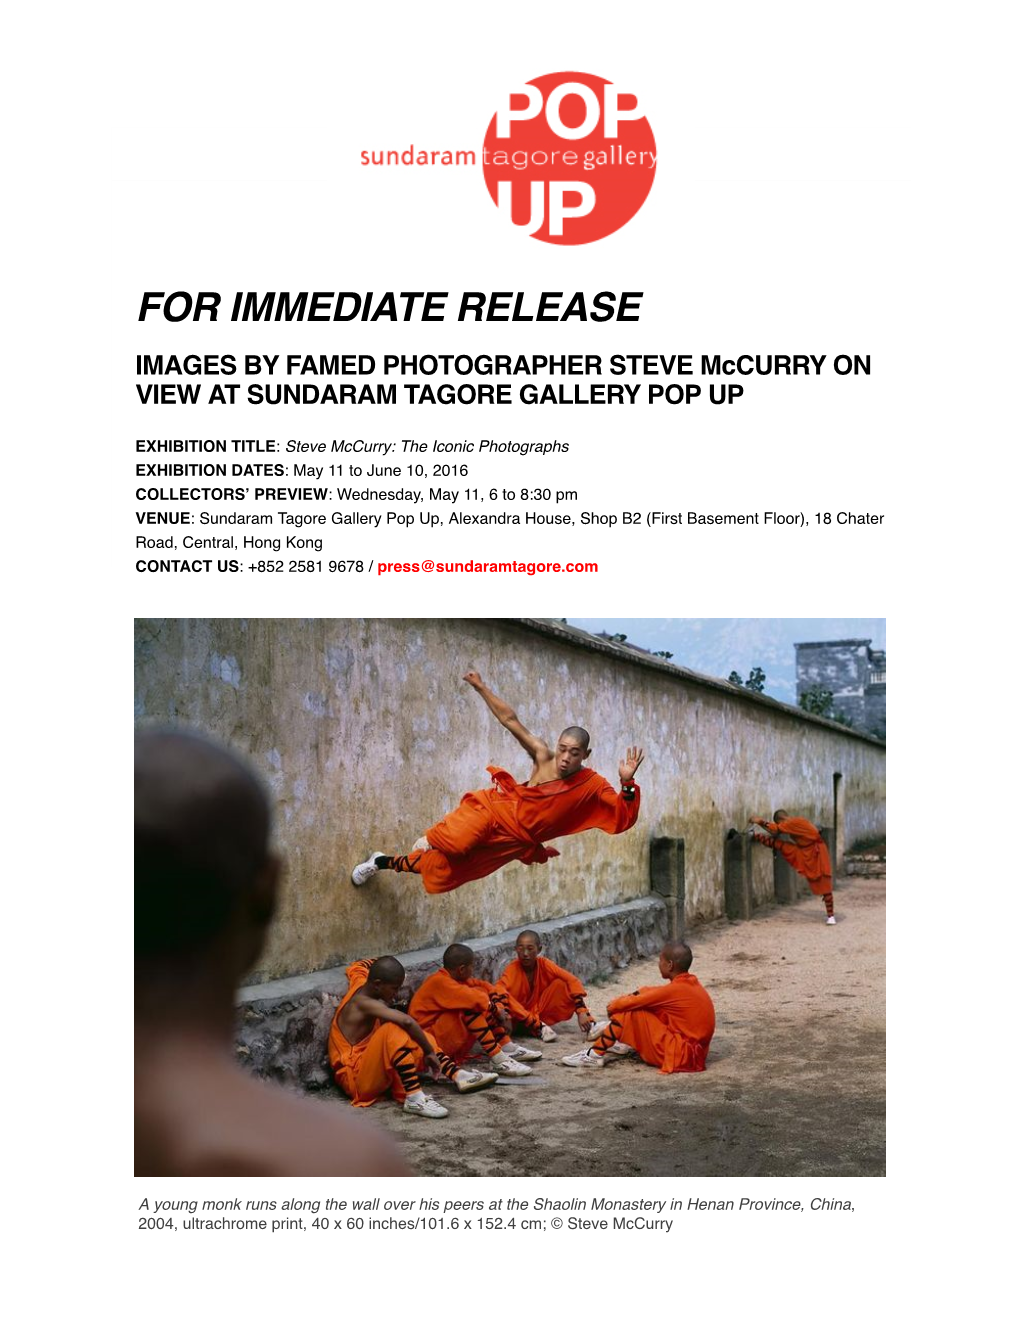 For Immediate Release Images by Famed Photographer